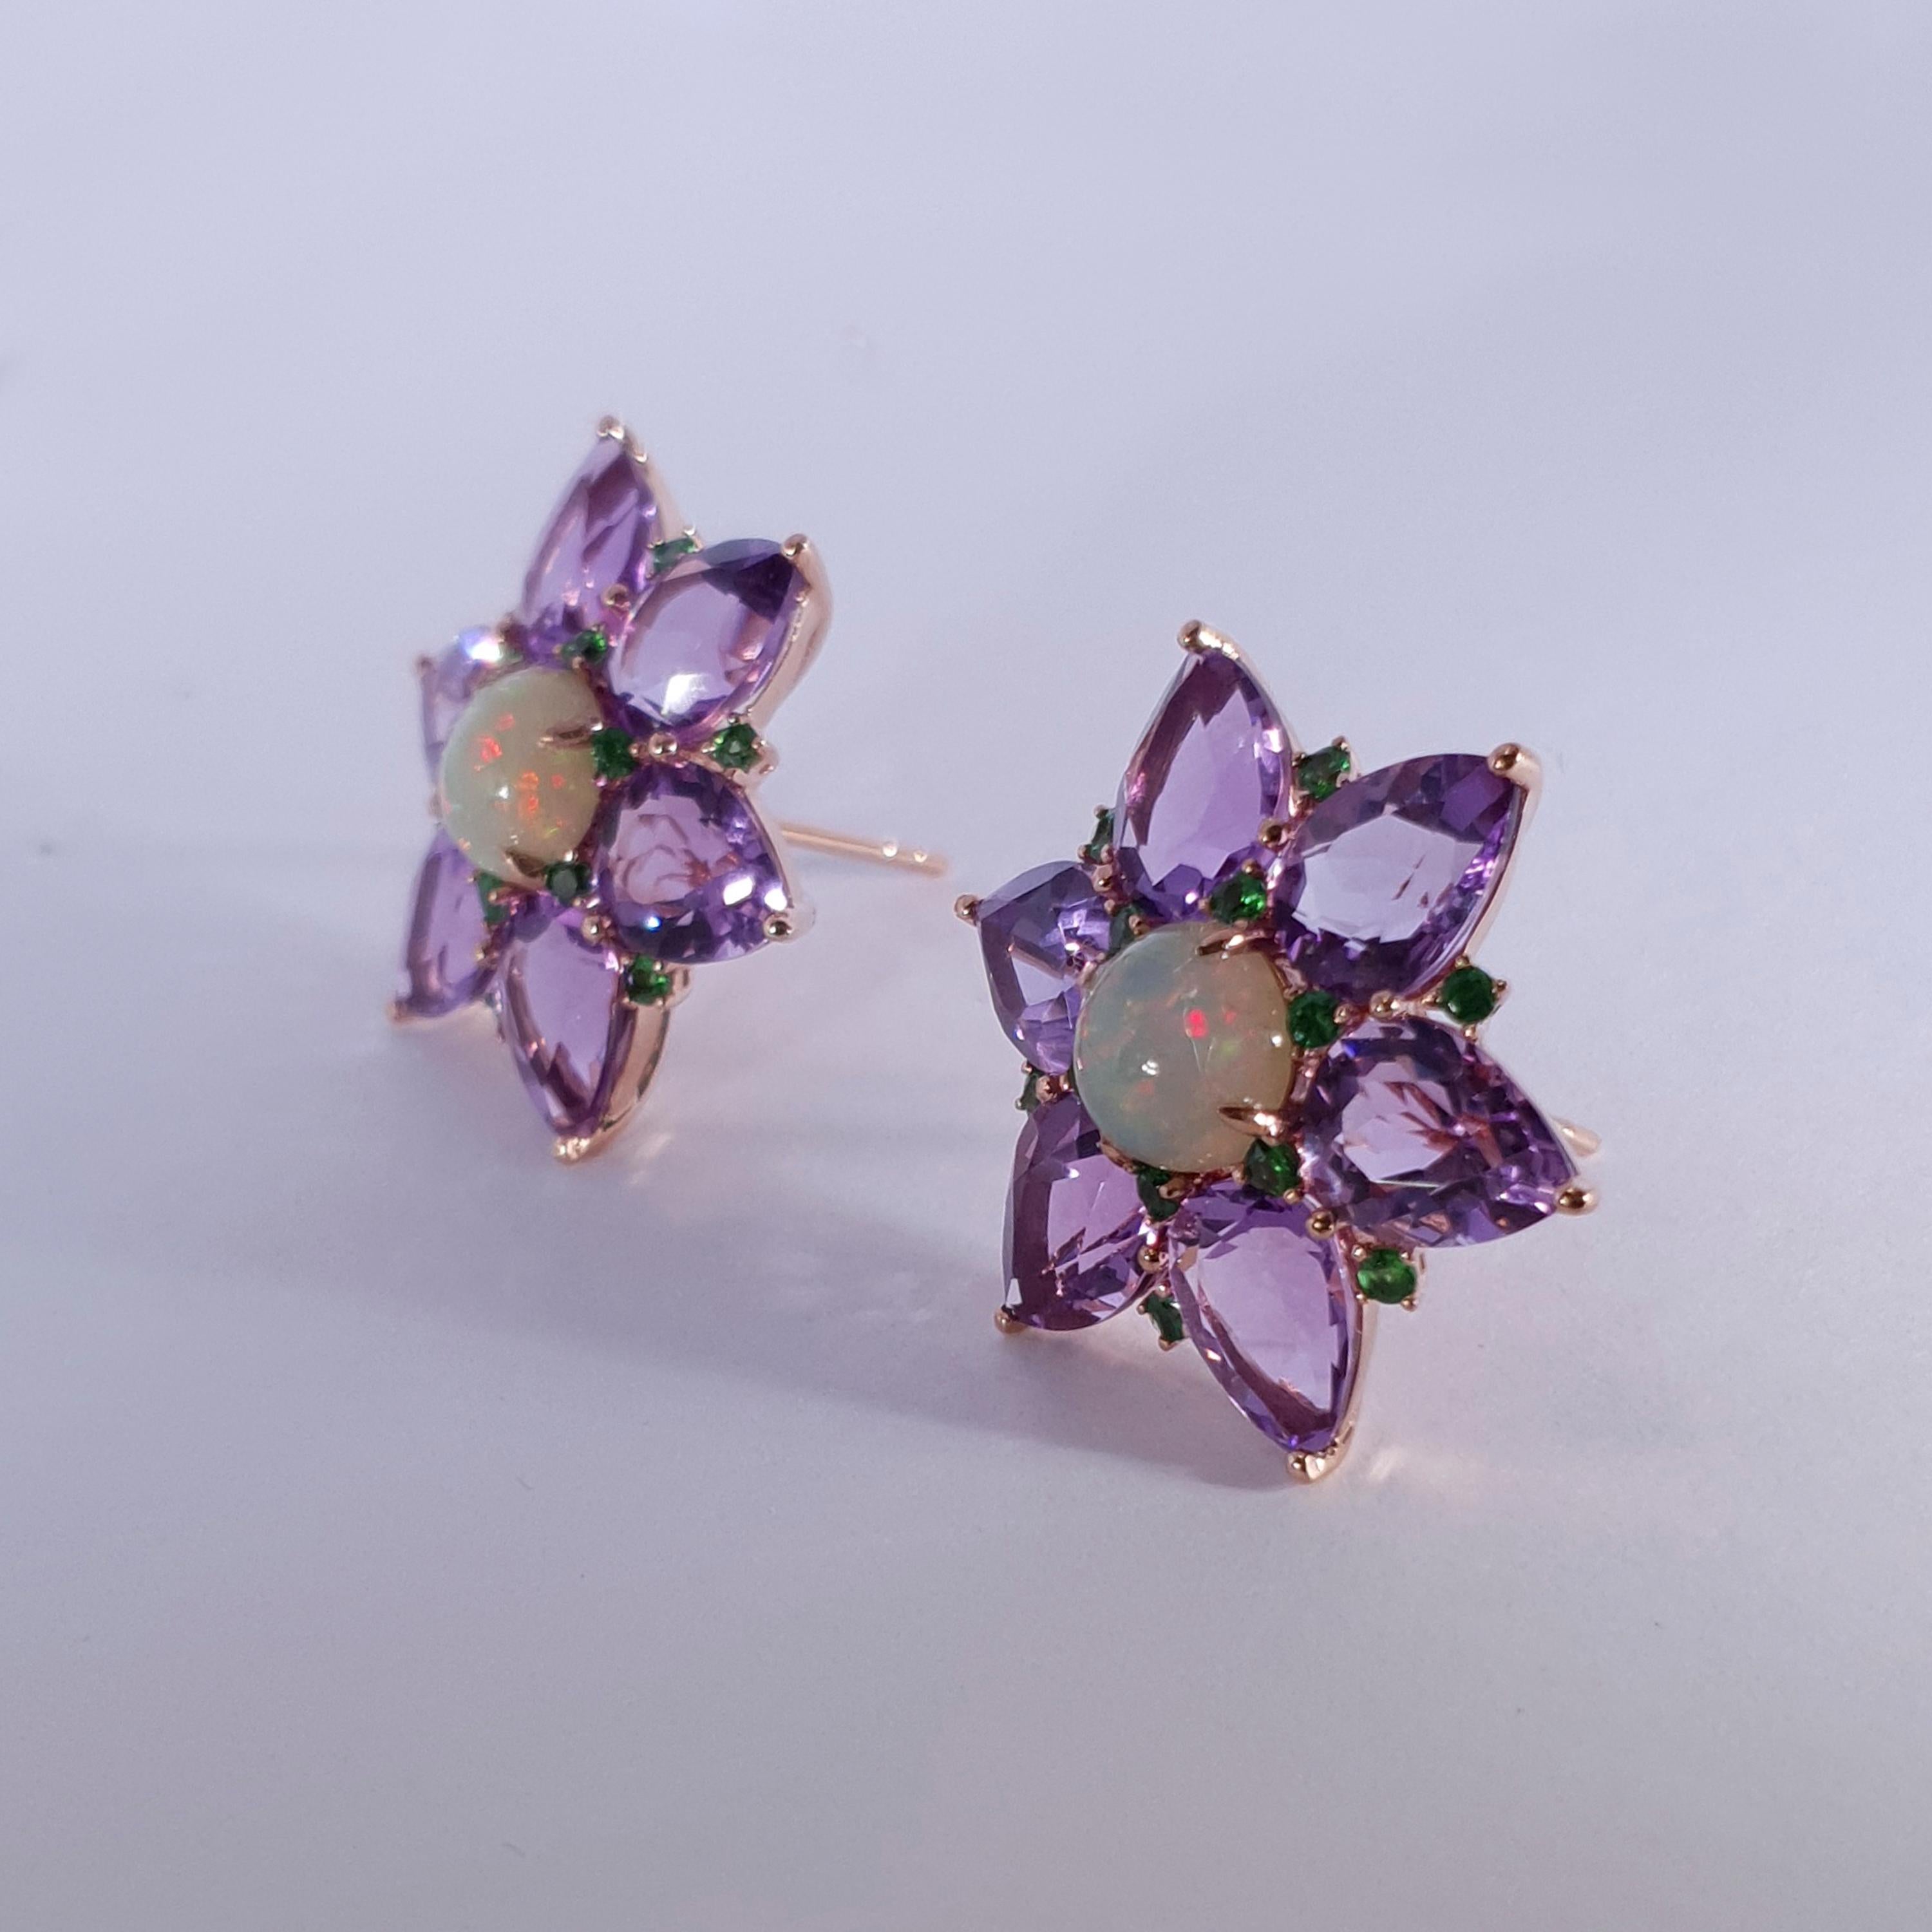 Description:
Statement earrings inspired by the vibrant florals of nature. Featuring central fiery opals, petals of purple amethyst and vibrant accents of demantoid set in contrasting 18ct rose gold.

Specification:
Dimensions (LxW): 25mm x